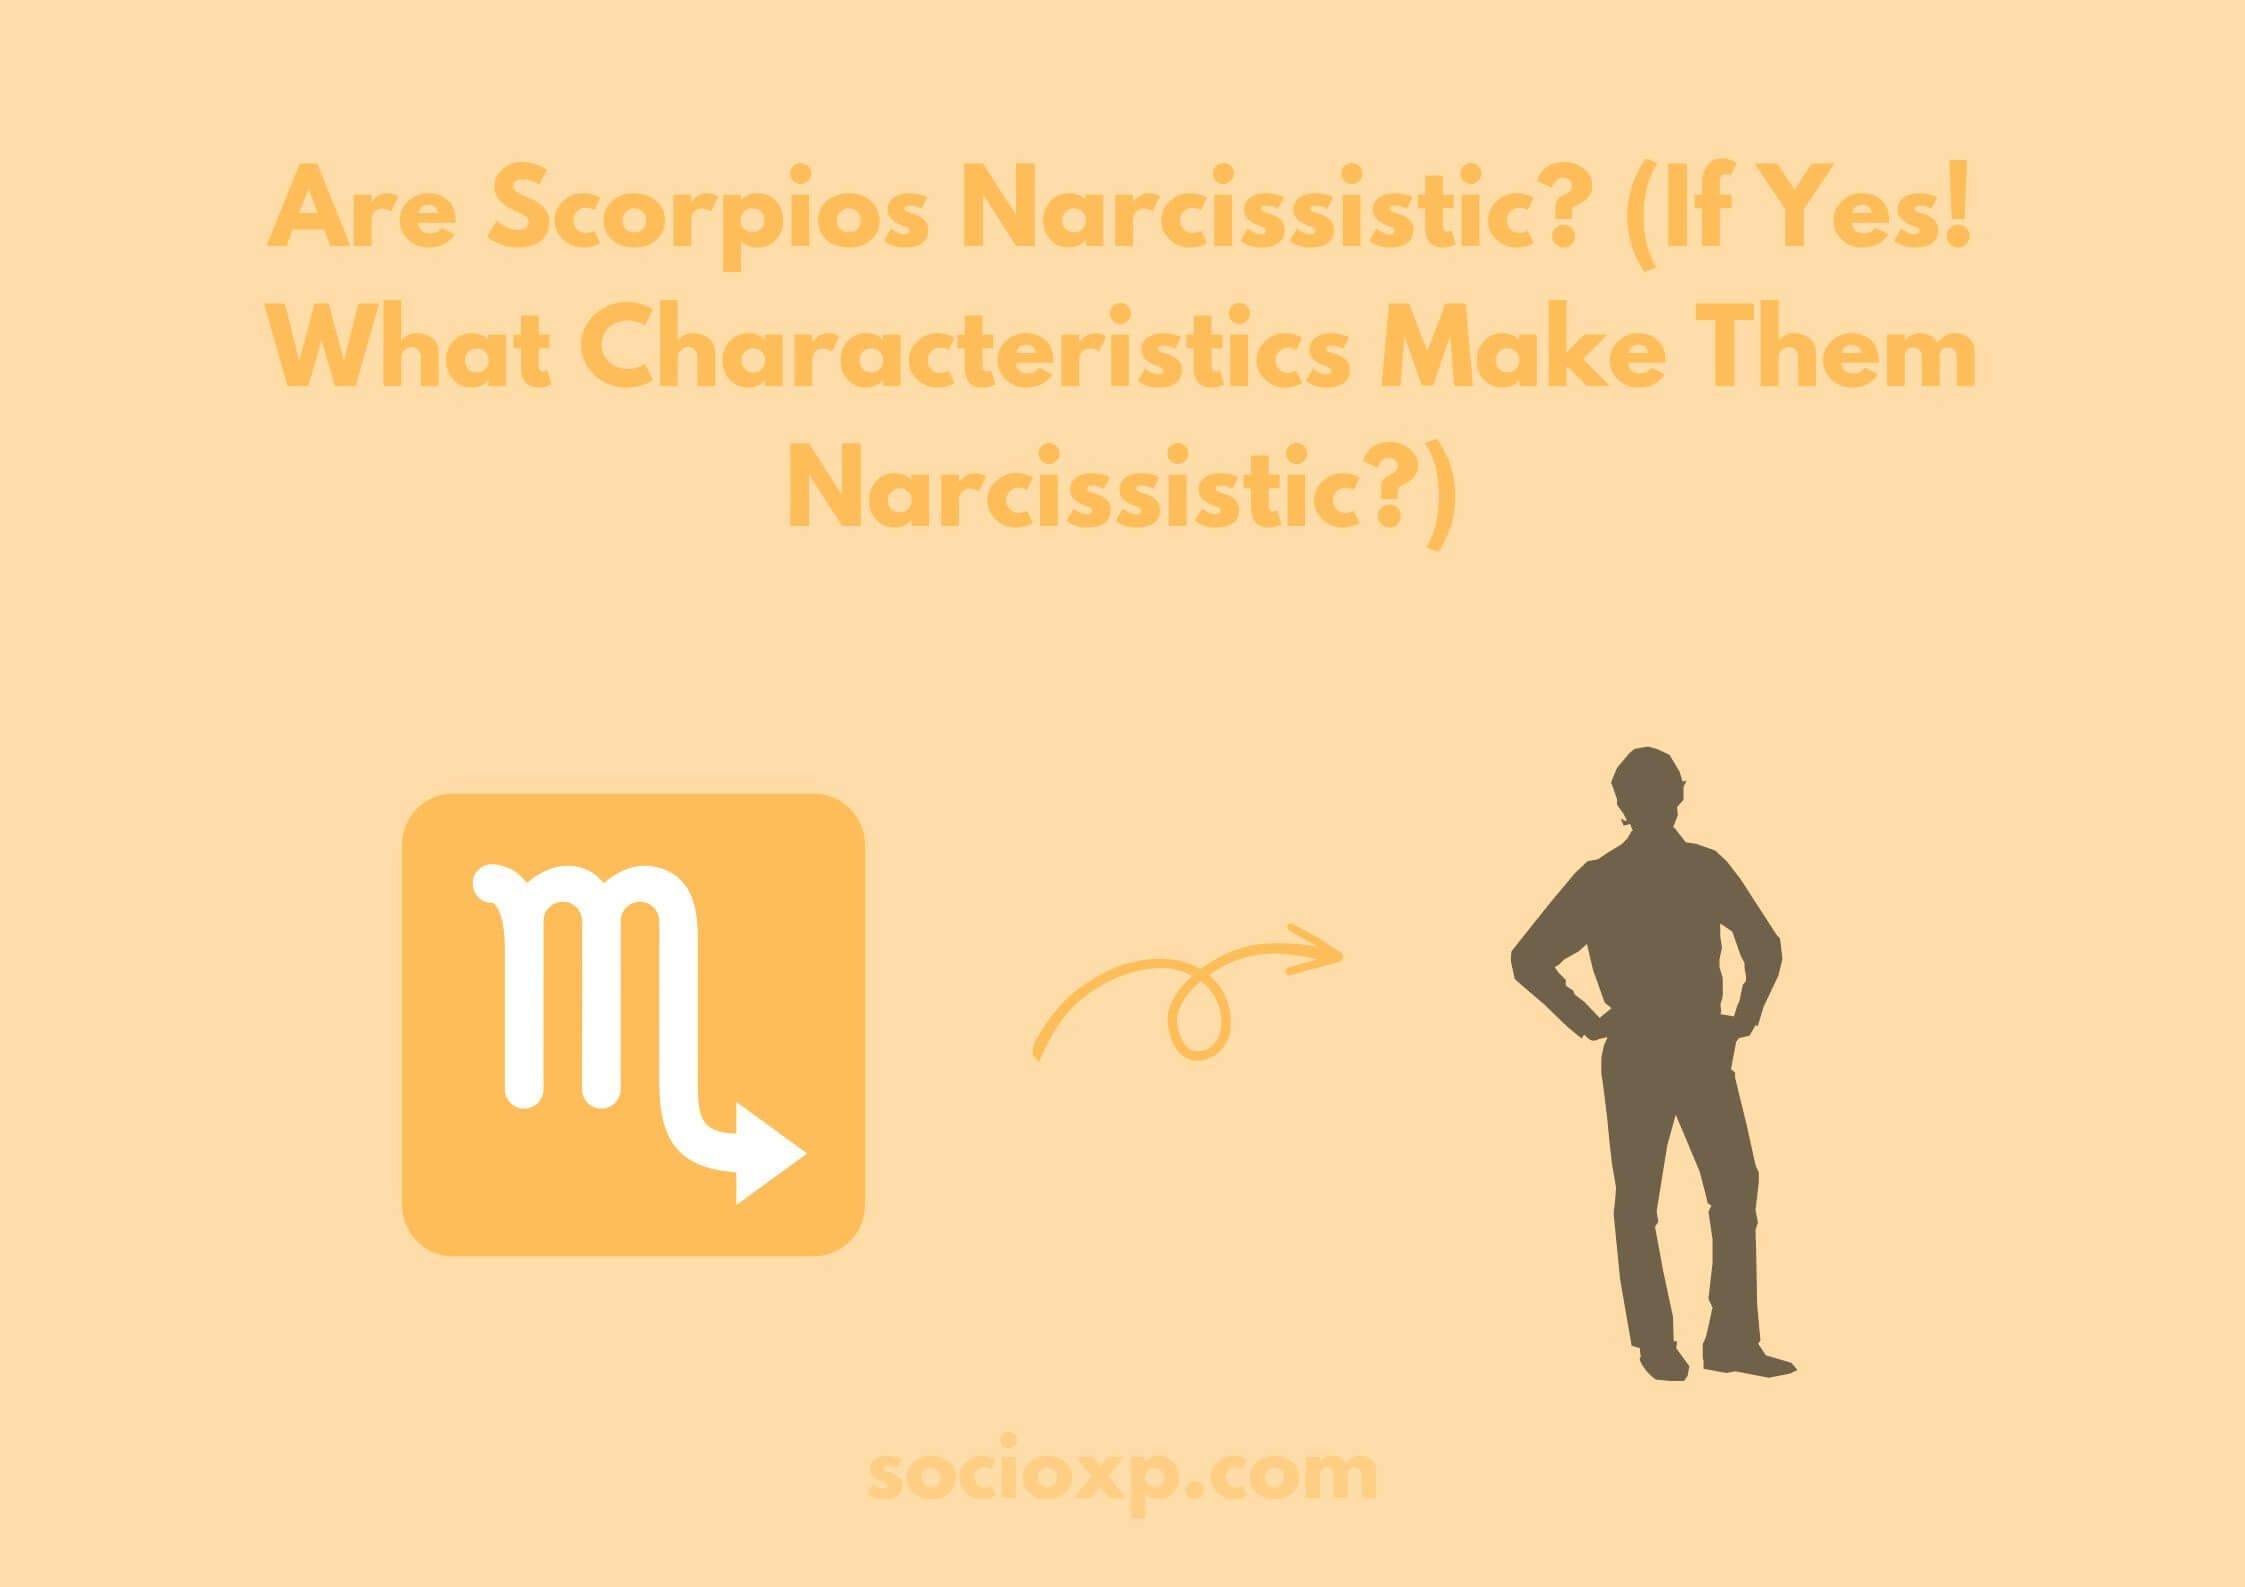 Are Scorpios Narcissistic? (If Yes! What Characteristics Make Them Narcissistic?)